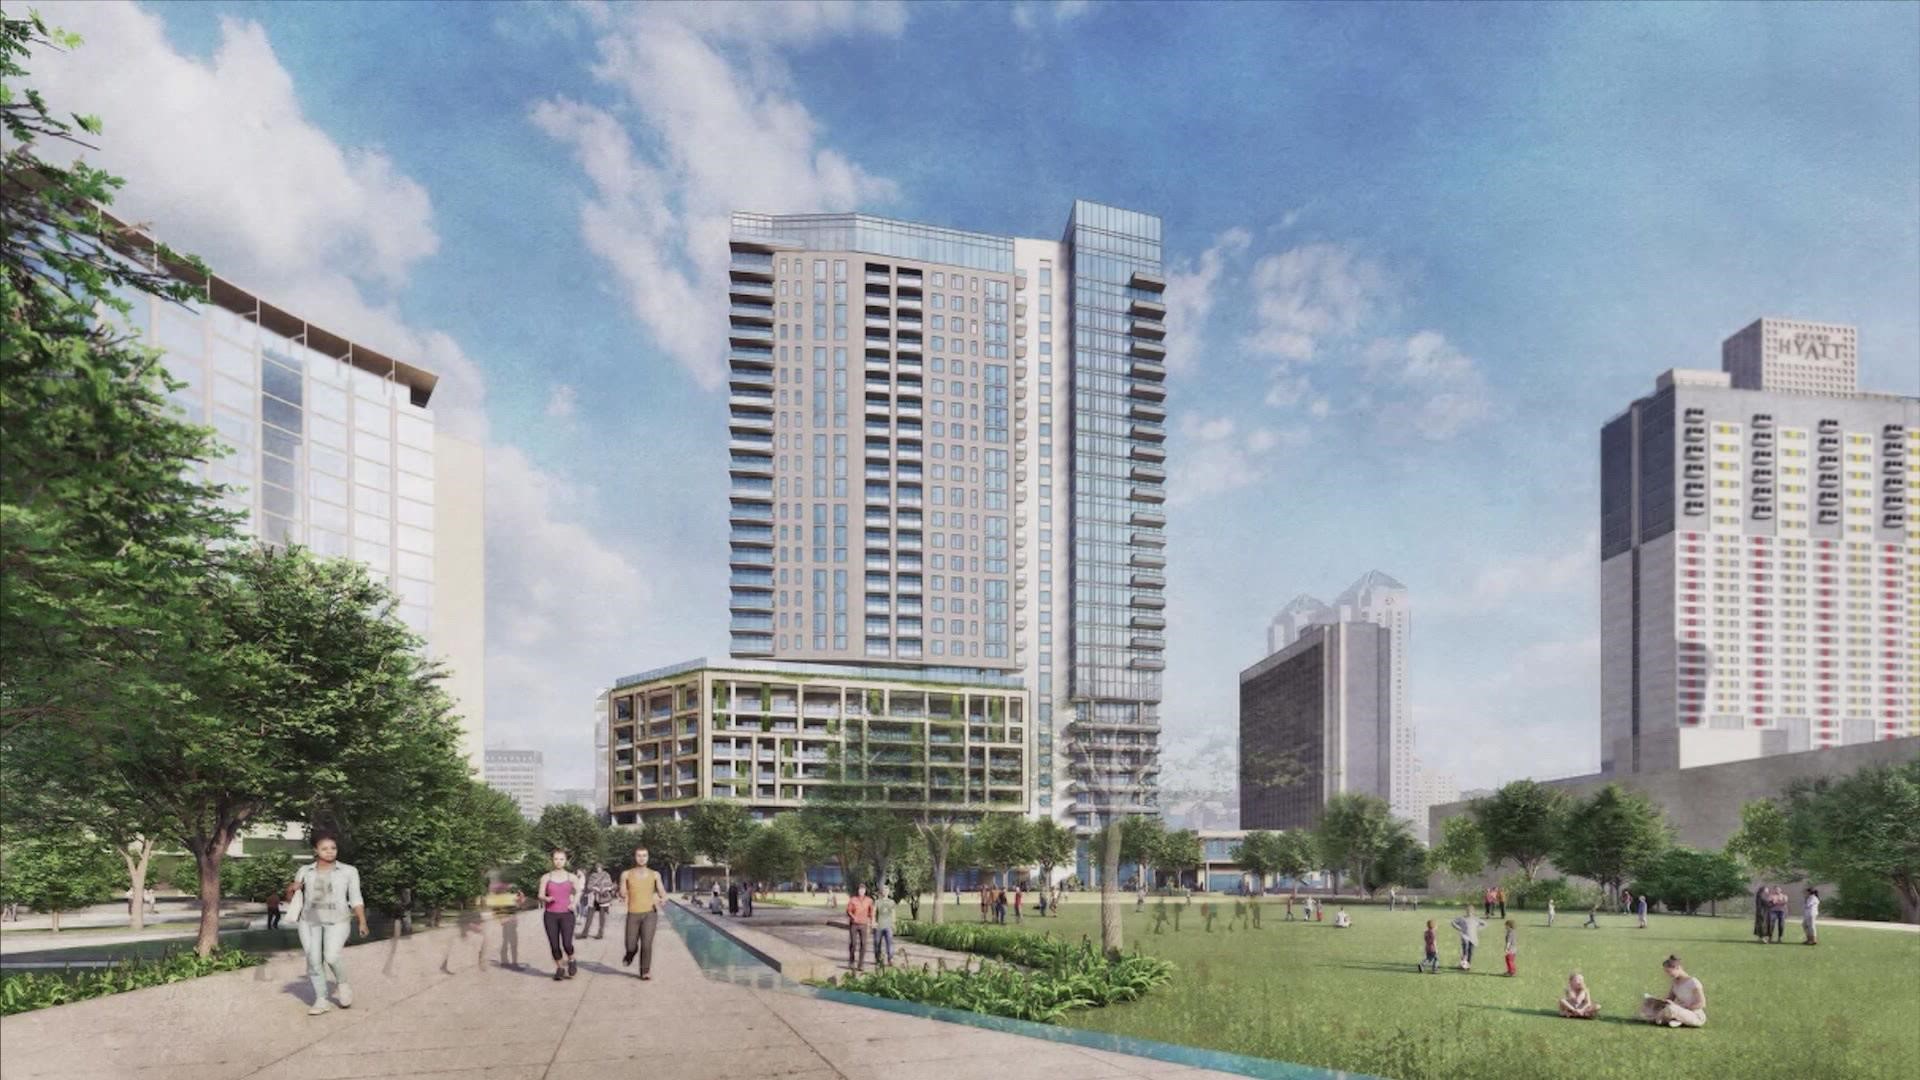 Things at Hemisfair will look a lot different in the next few years.